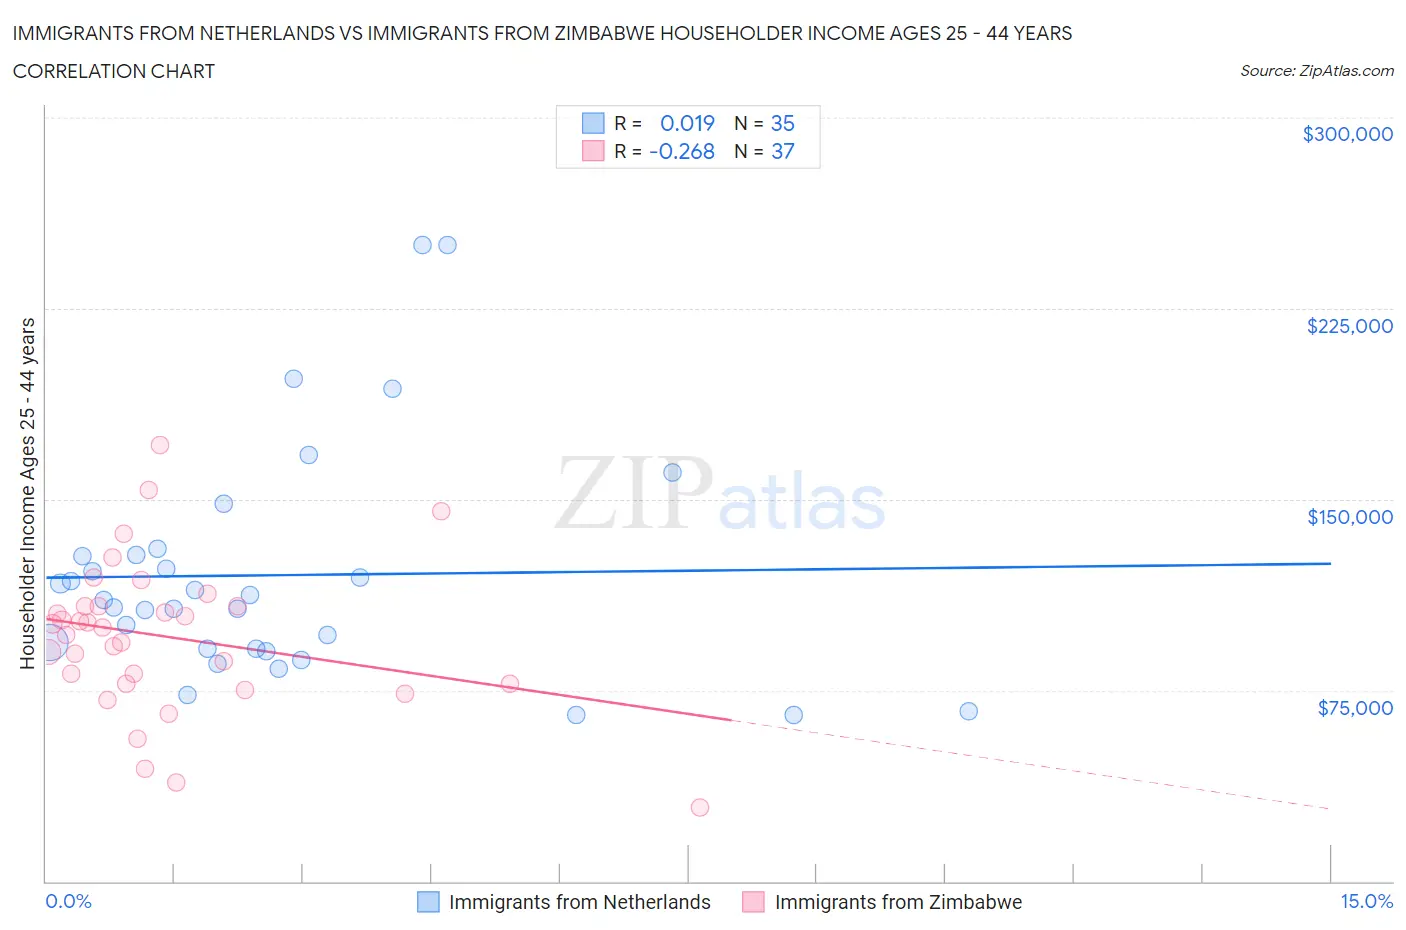 Immigrants from Netherlands vs Immigrants from Zimbabwe Householder Income Ages 25 - 44 years